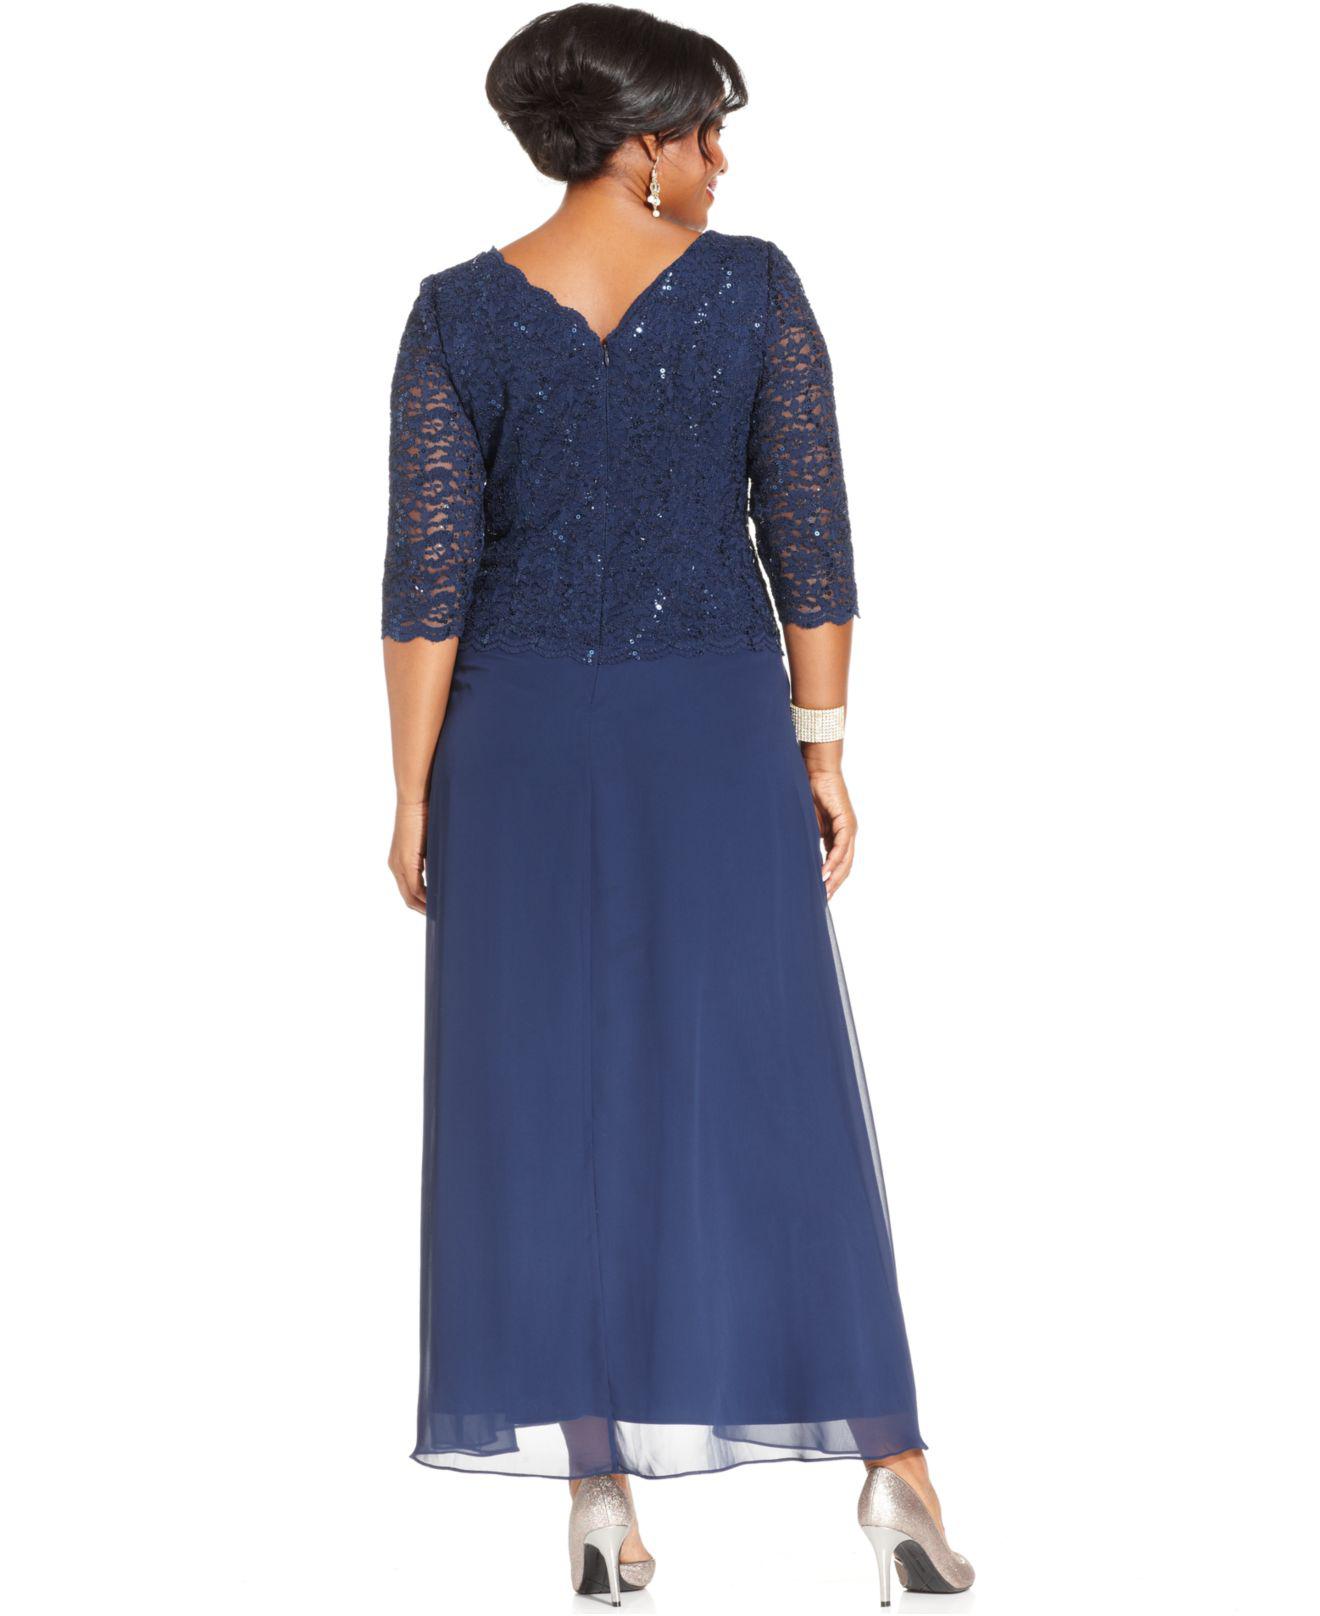 Alex Evenings Plus Size Sequined Lace Gown in Navy (Blue) - Lyst